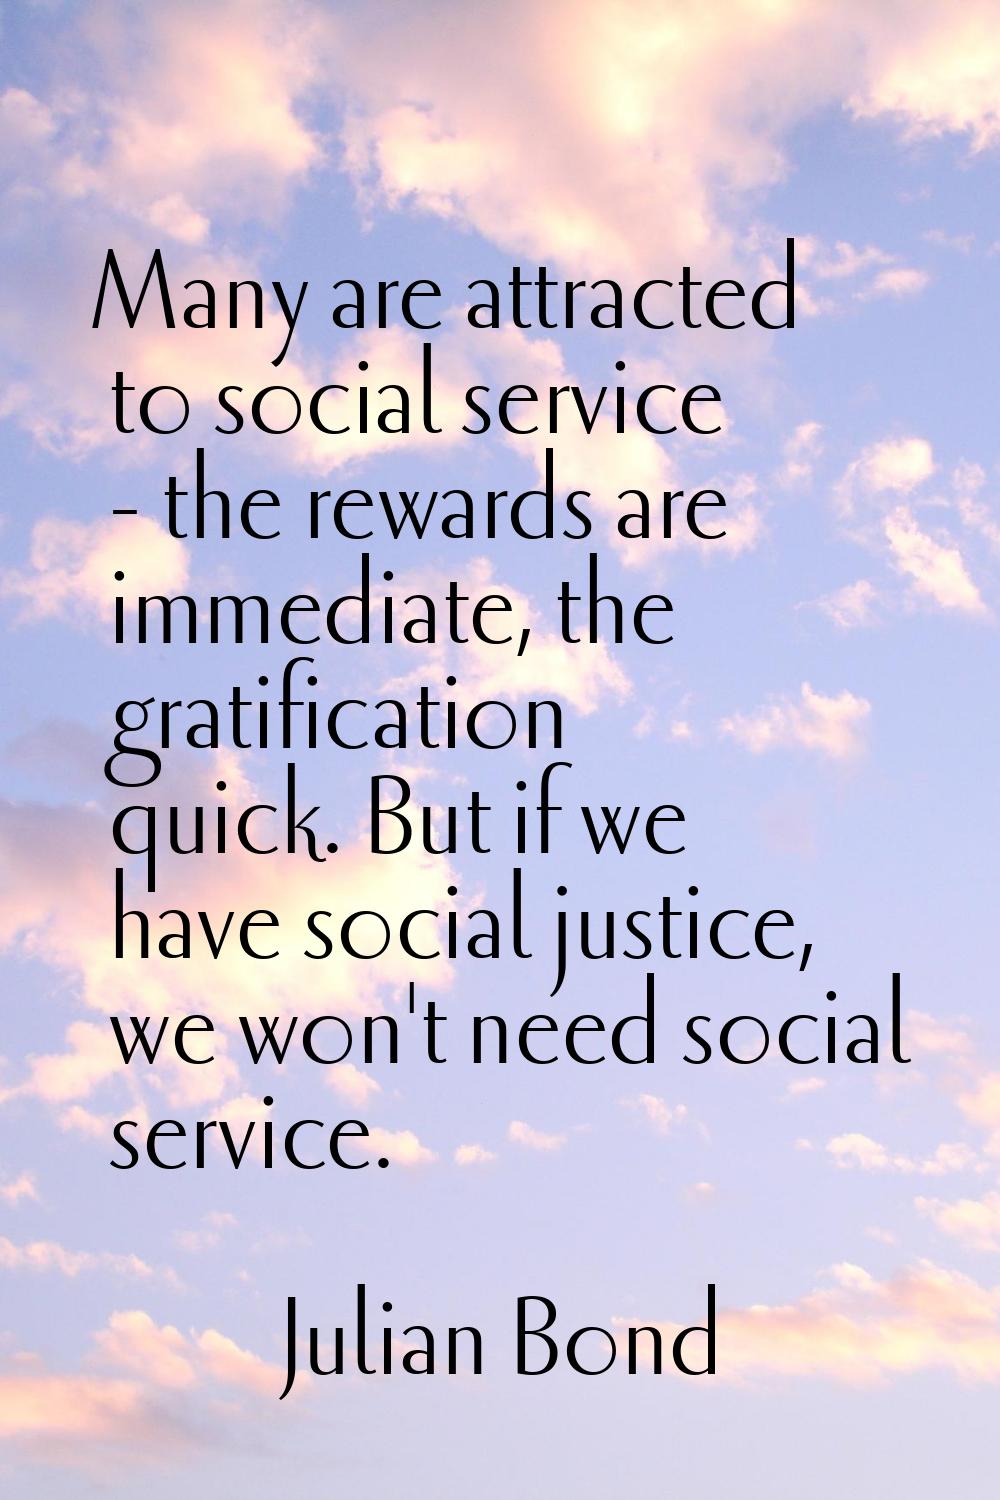 Many are attracted to social service - the rewards are immediate, the gratification quick. But if w